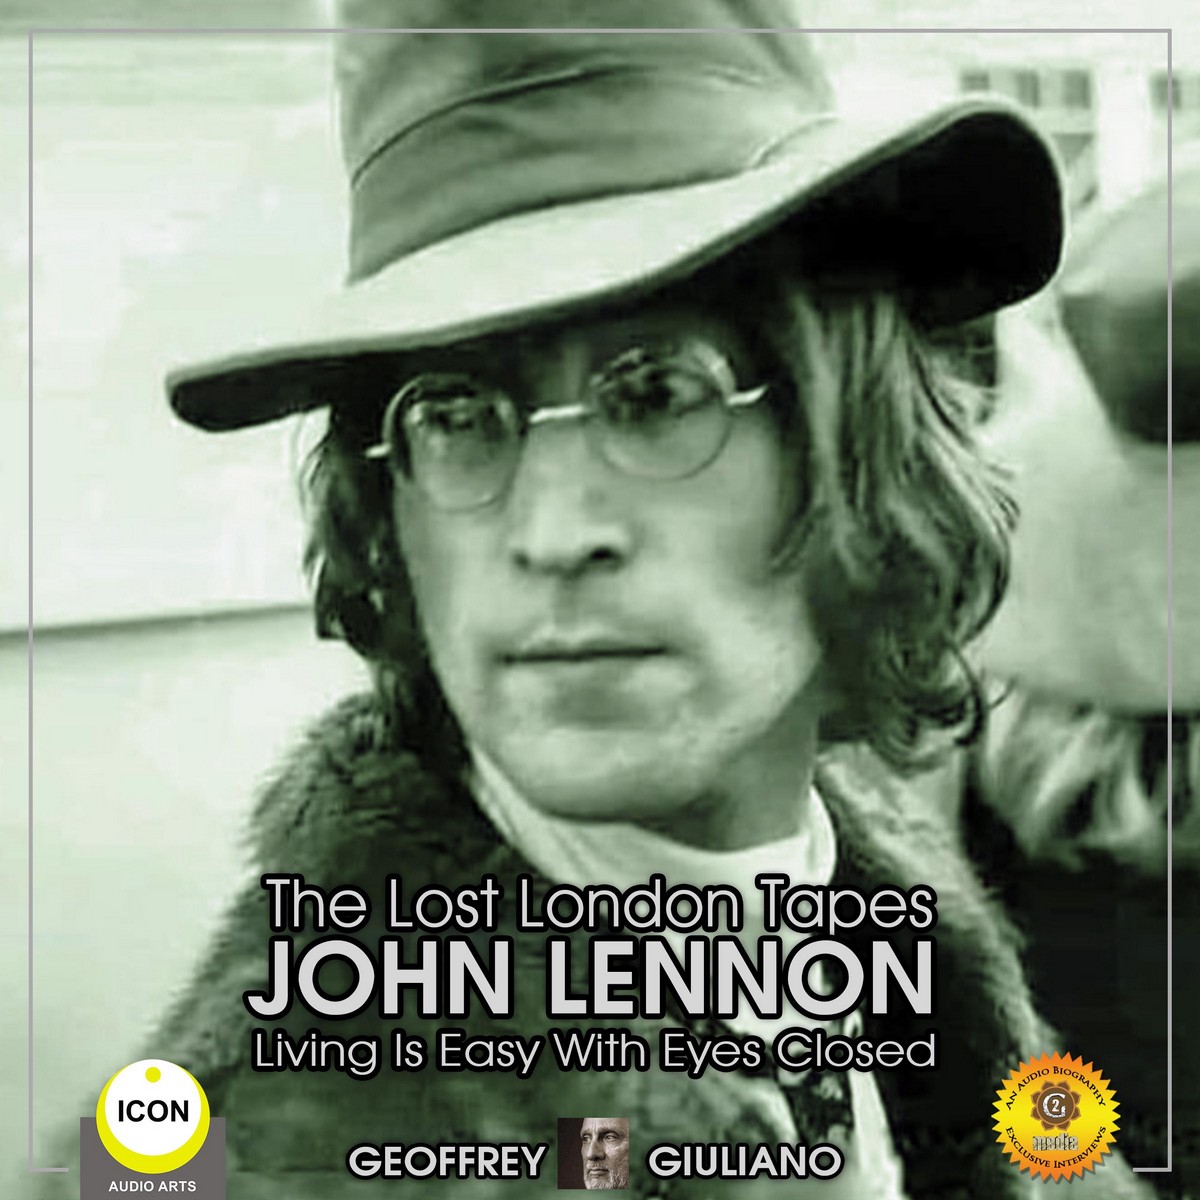 The Lost London Tapes John Lennon – Living Is Easy With Eyes Closed